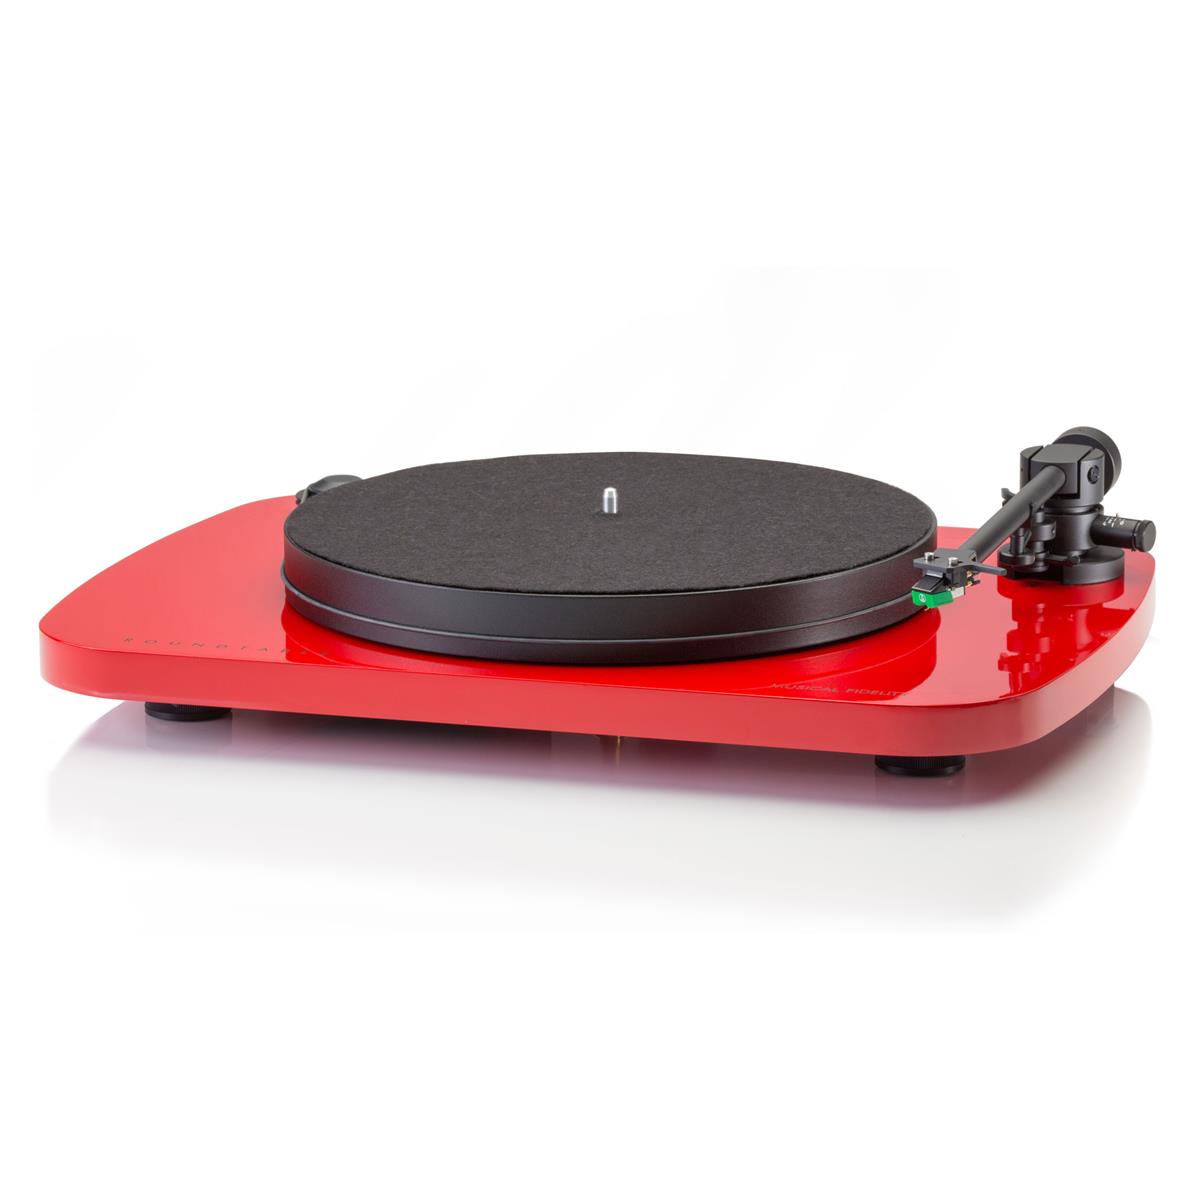 

Musical Fidelity Roundtable S Turntable, Red